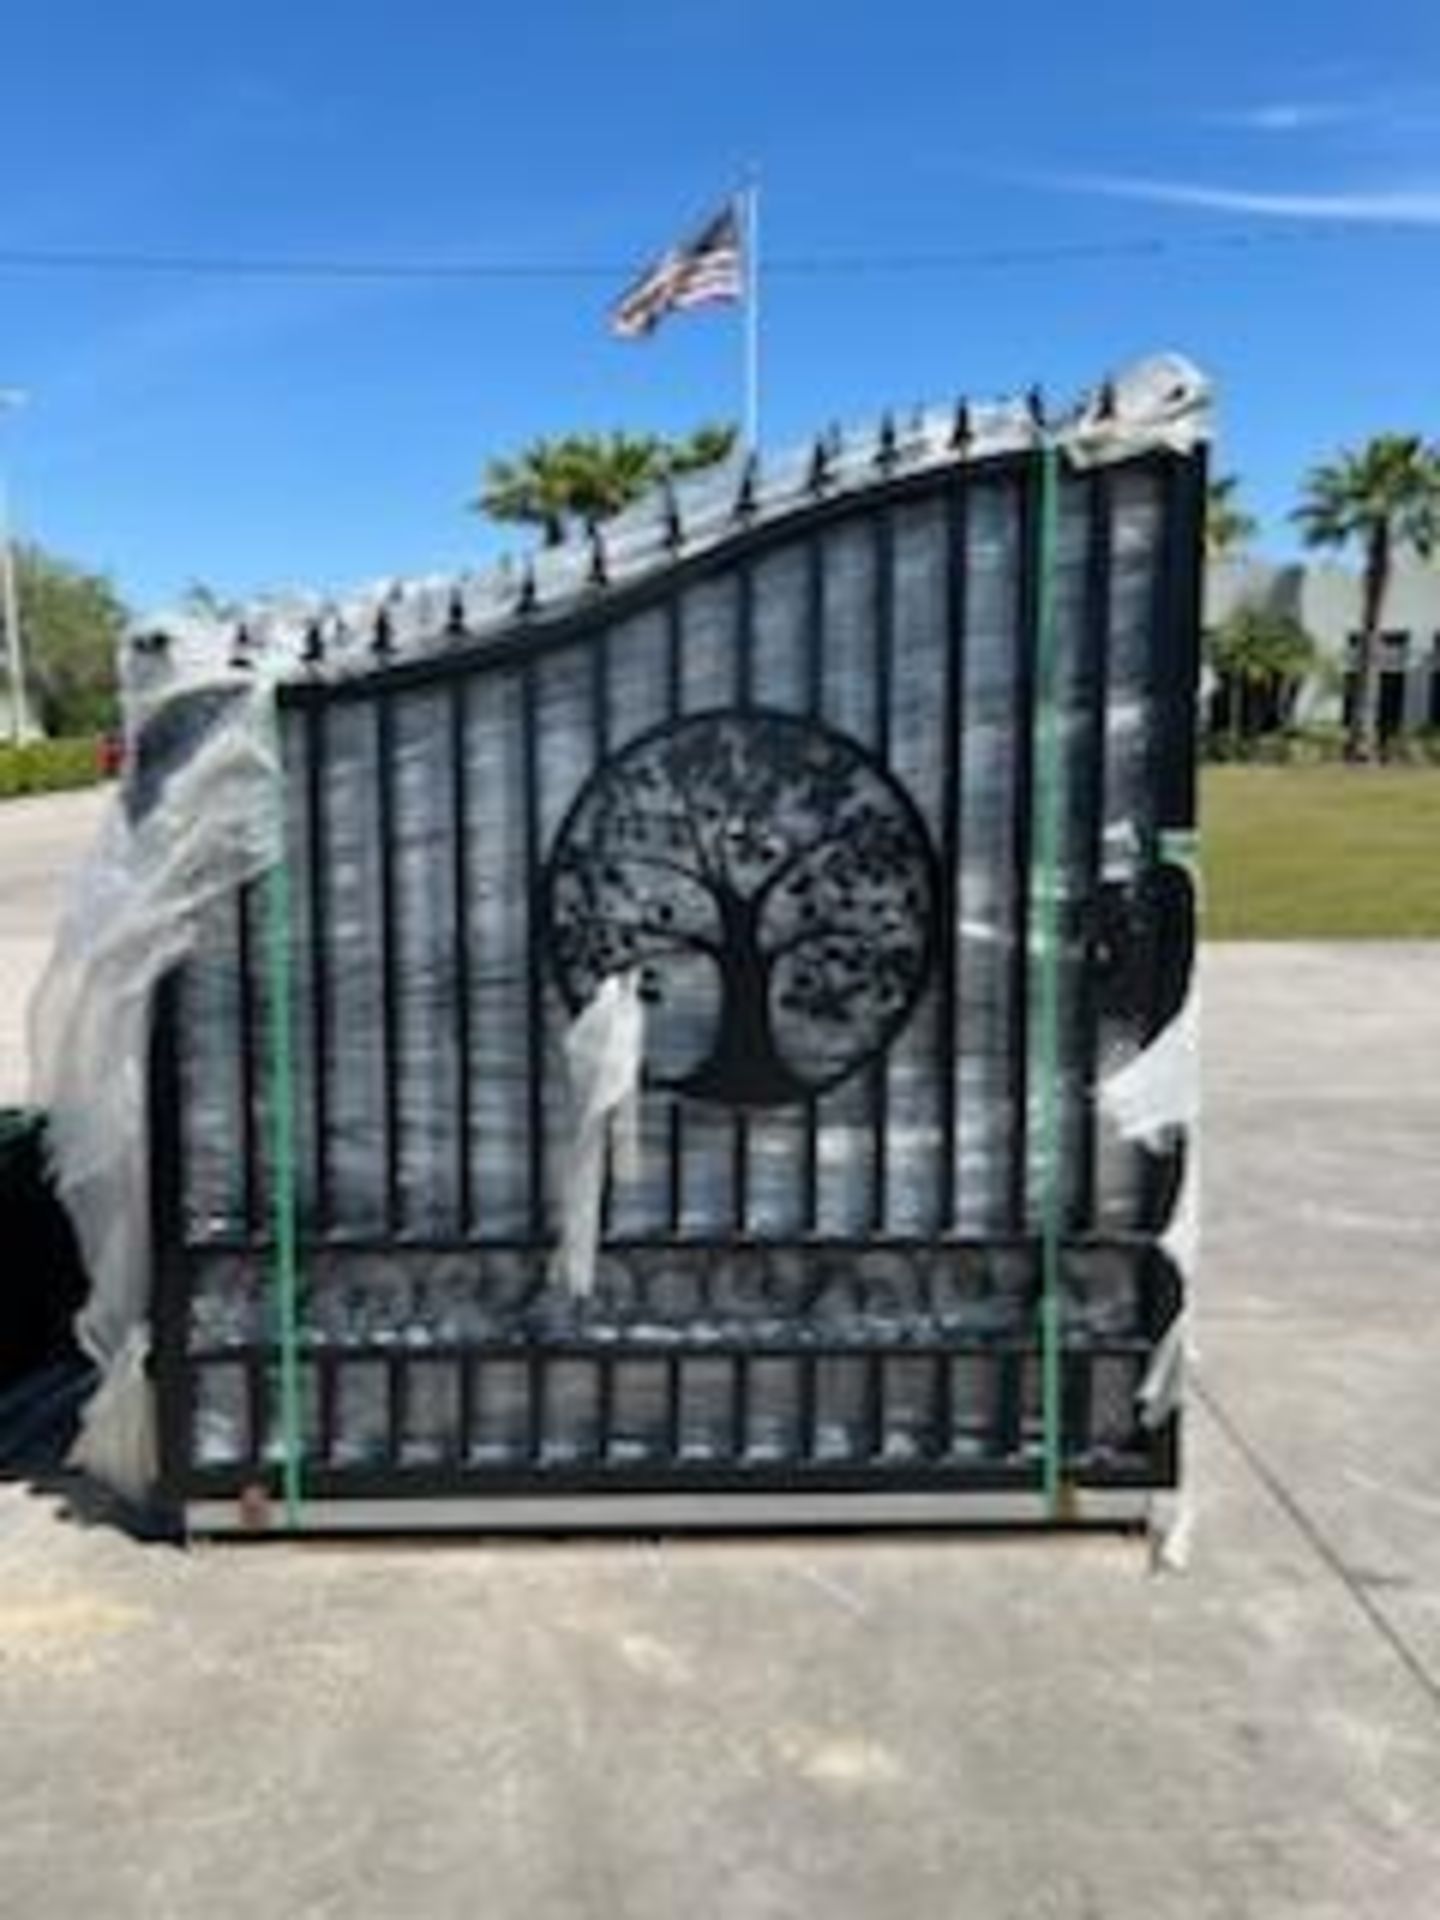 SET OF UNUSED GREAT BEAR 14FT BI PARTING WROUGHT IRON GATES, 7FT EACH PIECE (14' TOTAL WIDTH). 2